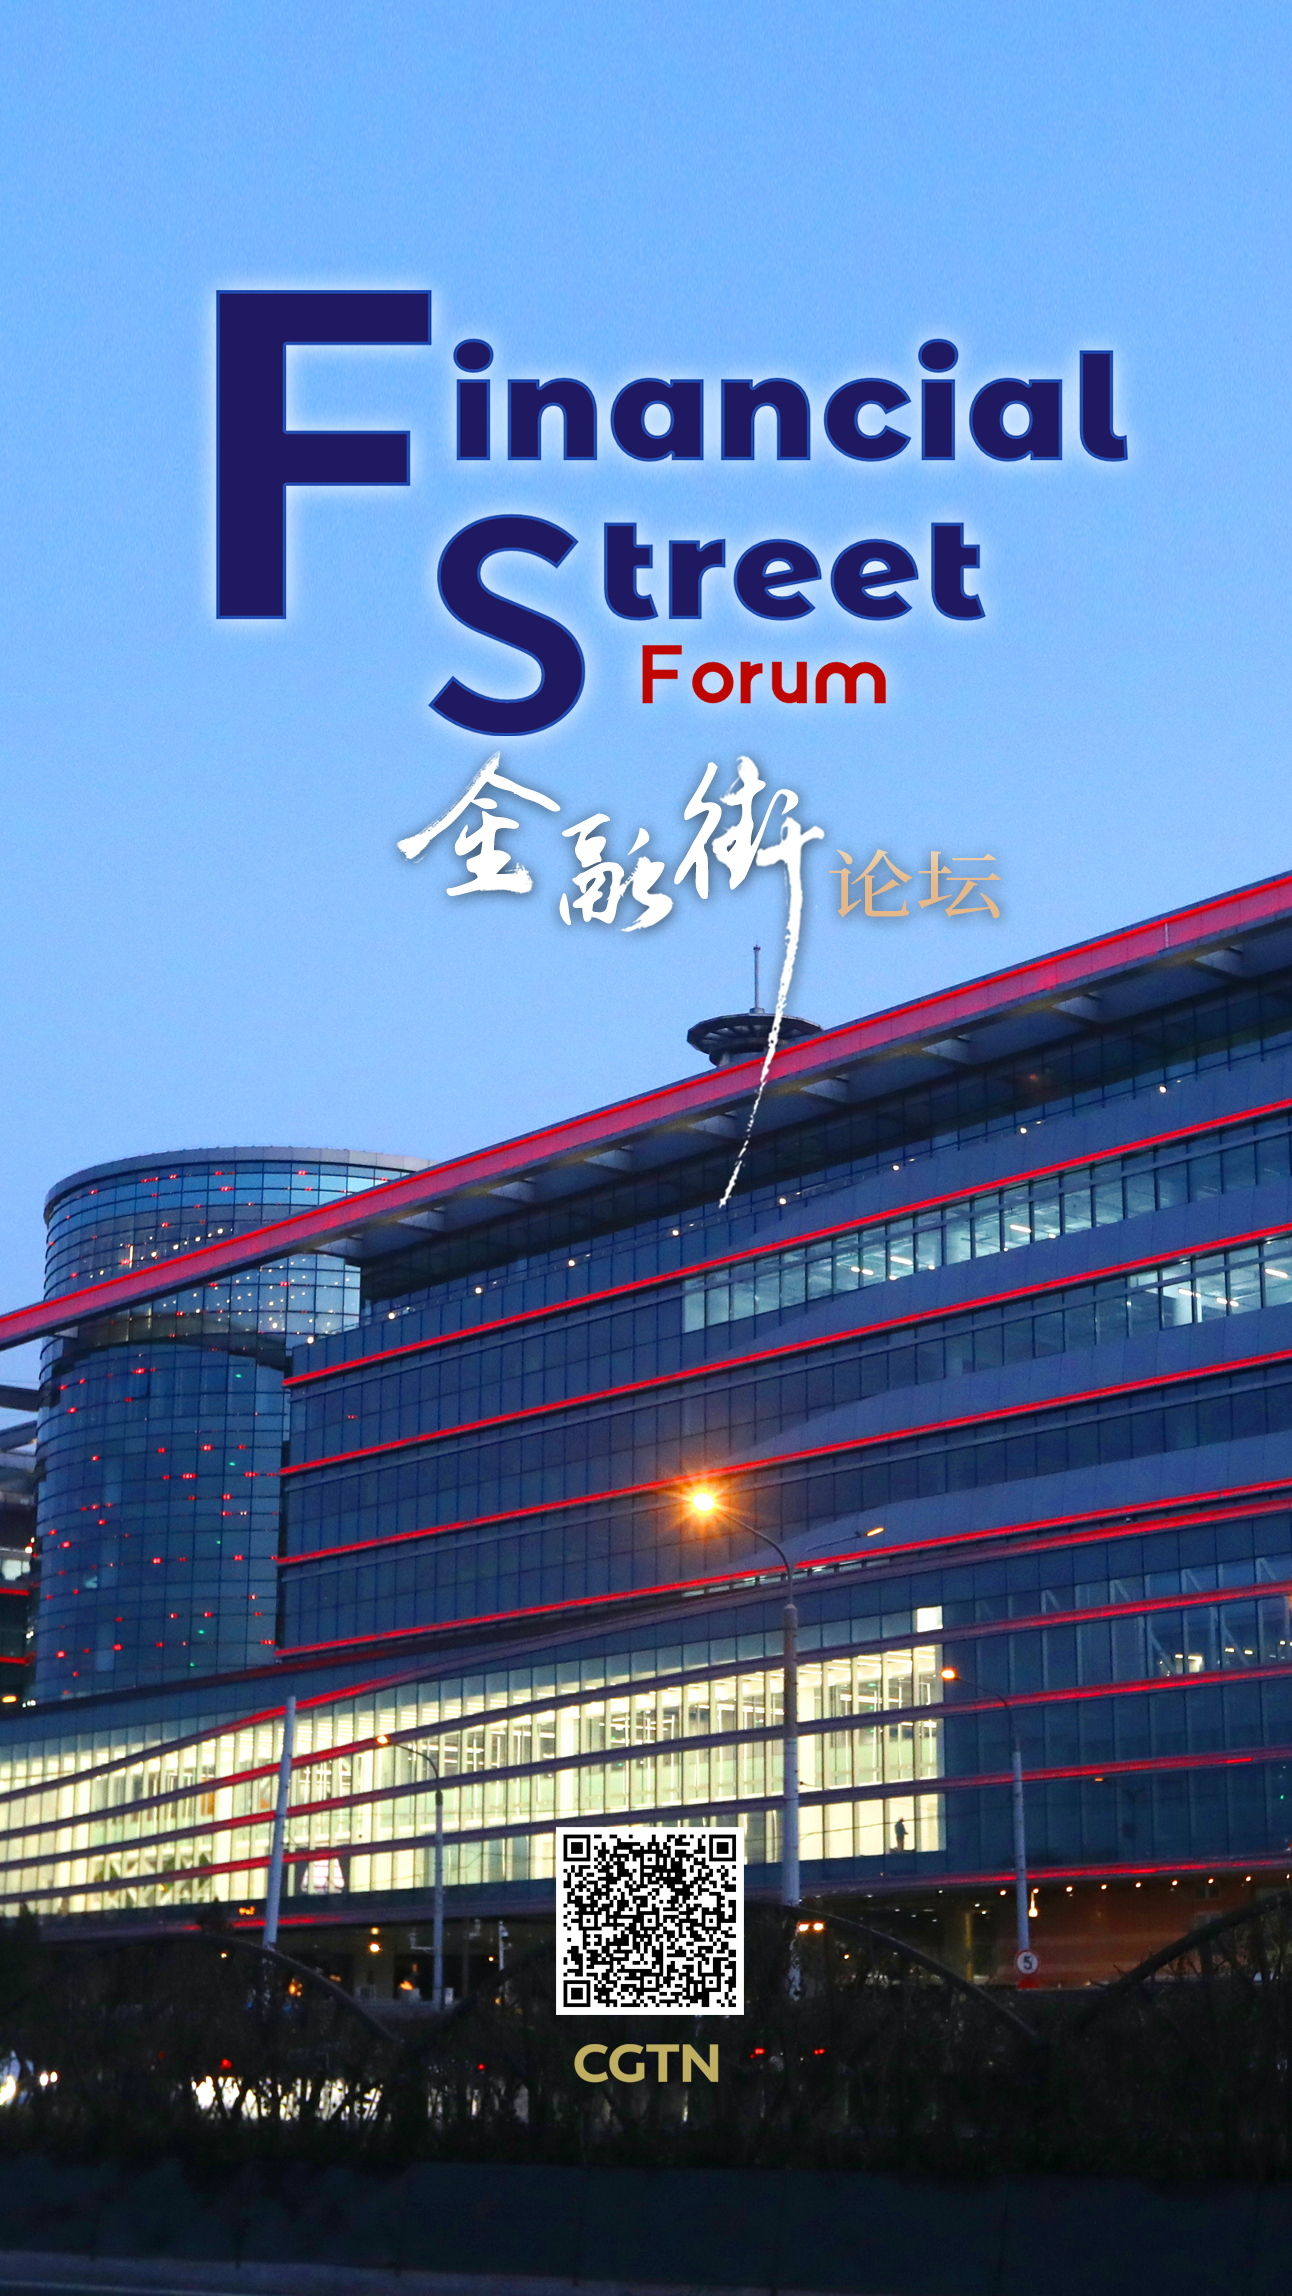 Annual Conference of Financial Street Forum 2022 to be held in Beijing